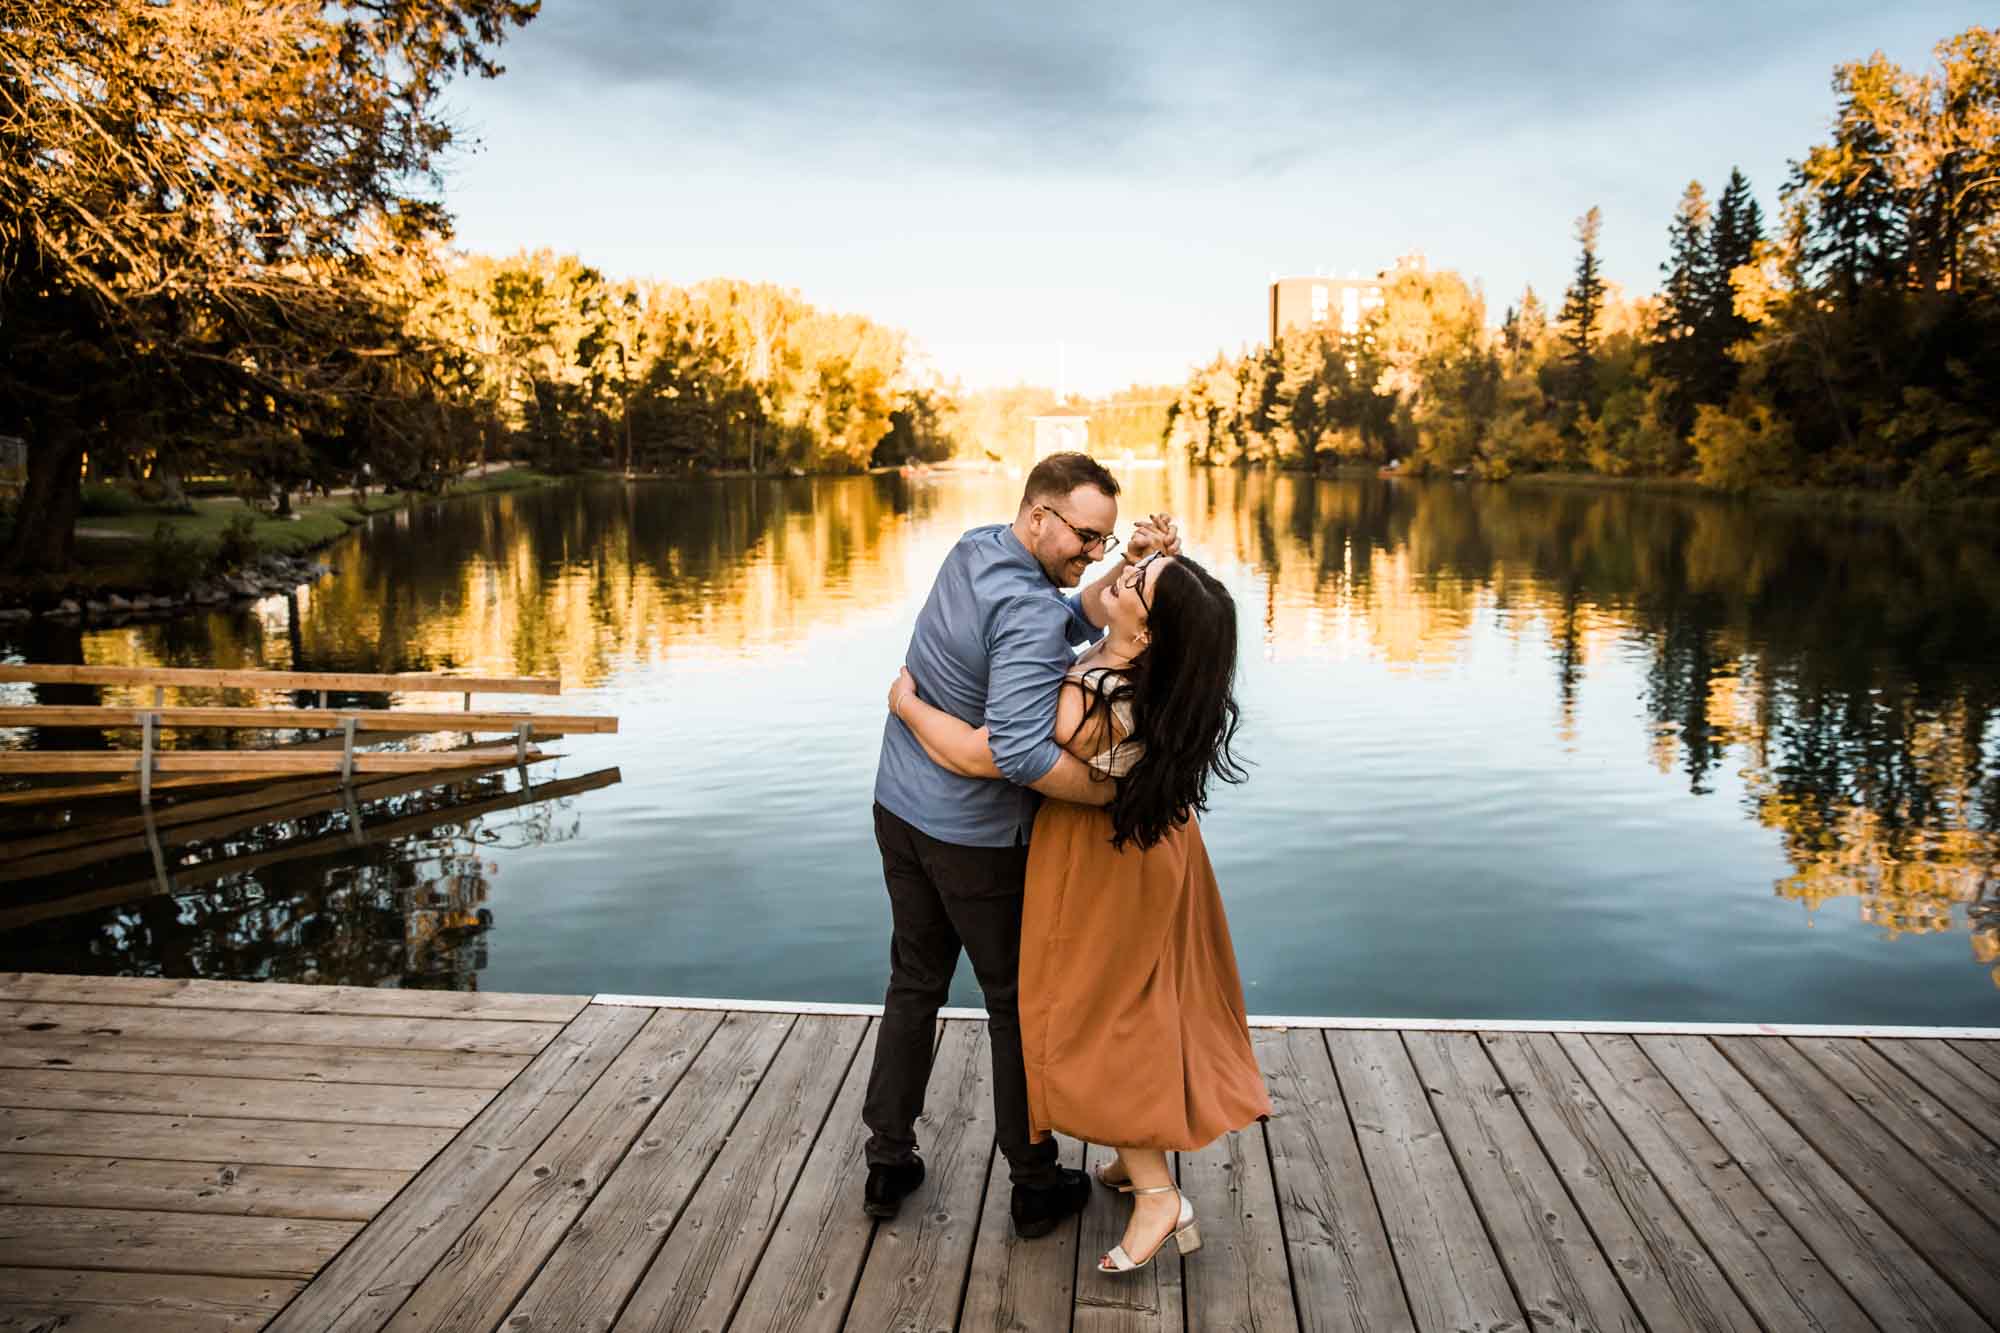 Calgary wedding photographer, engagement photos at Bowness Park, couple in front of fall trees